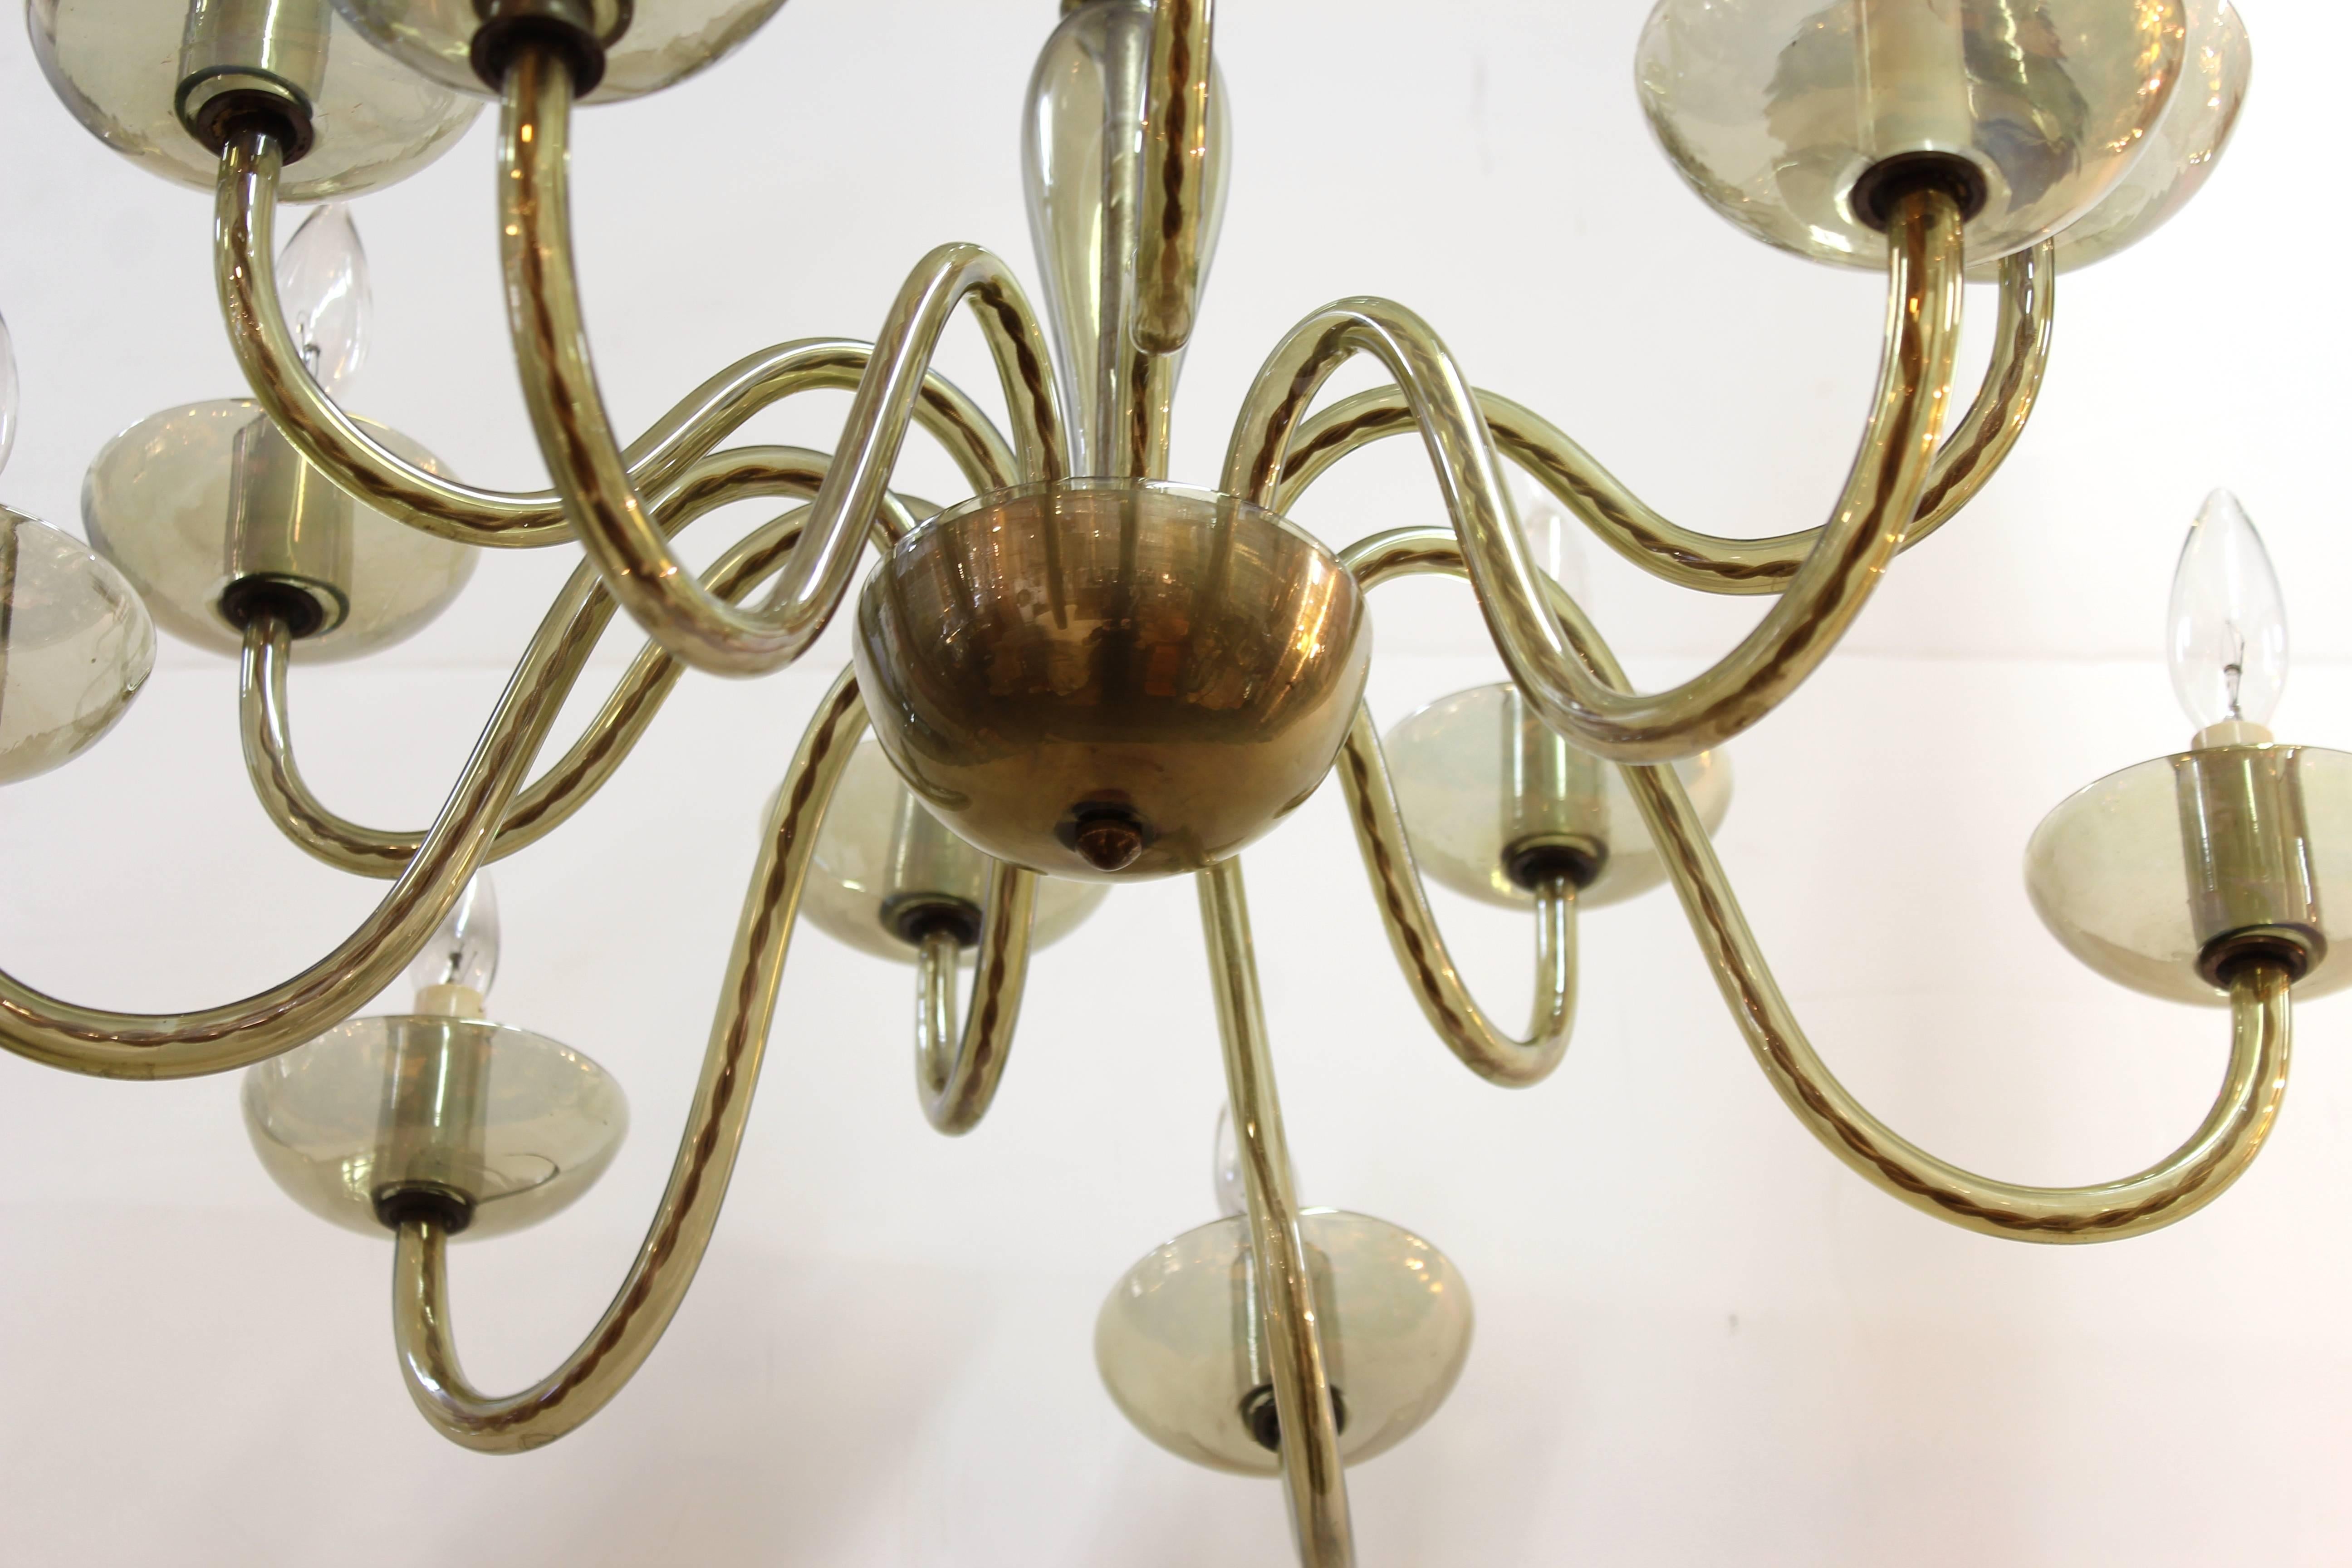 A Mid-Century Modern chandelier made in smoked glass in Italy in the mid-20th century. The piece has had visible repair work done on one of its arms and there are small cracks in one of the glass rims of another arm.